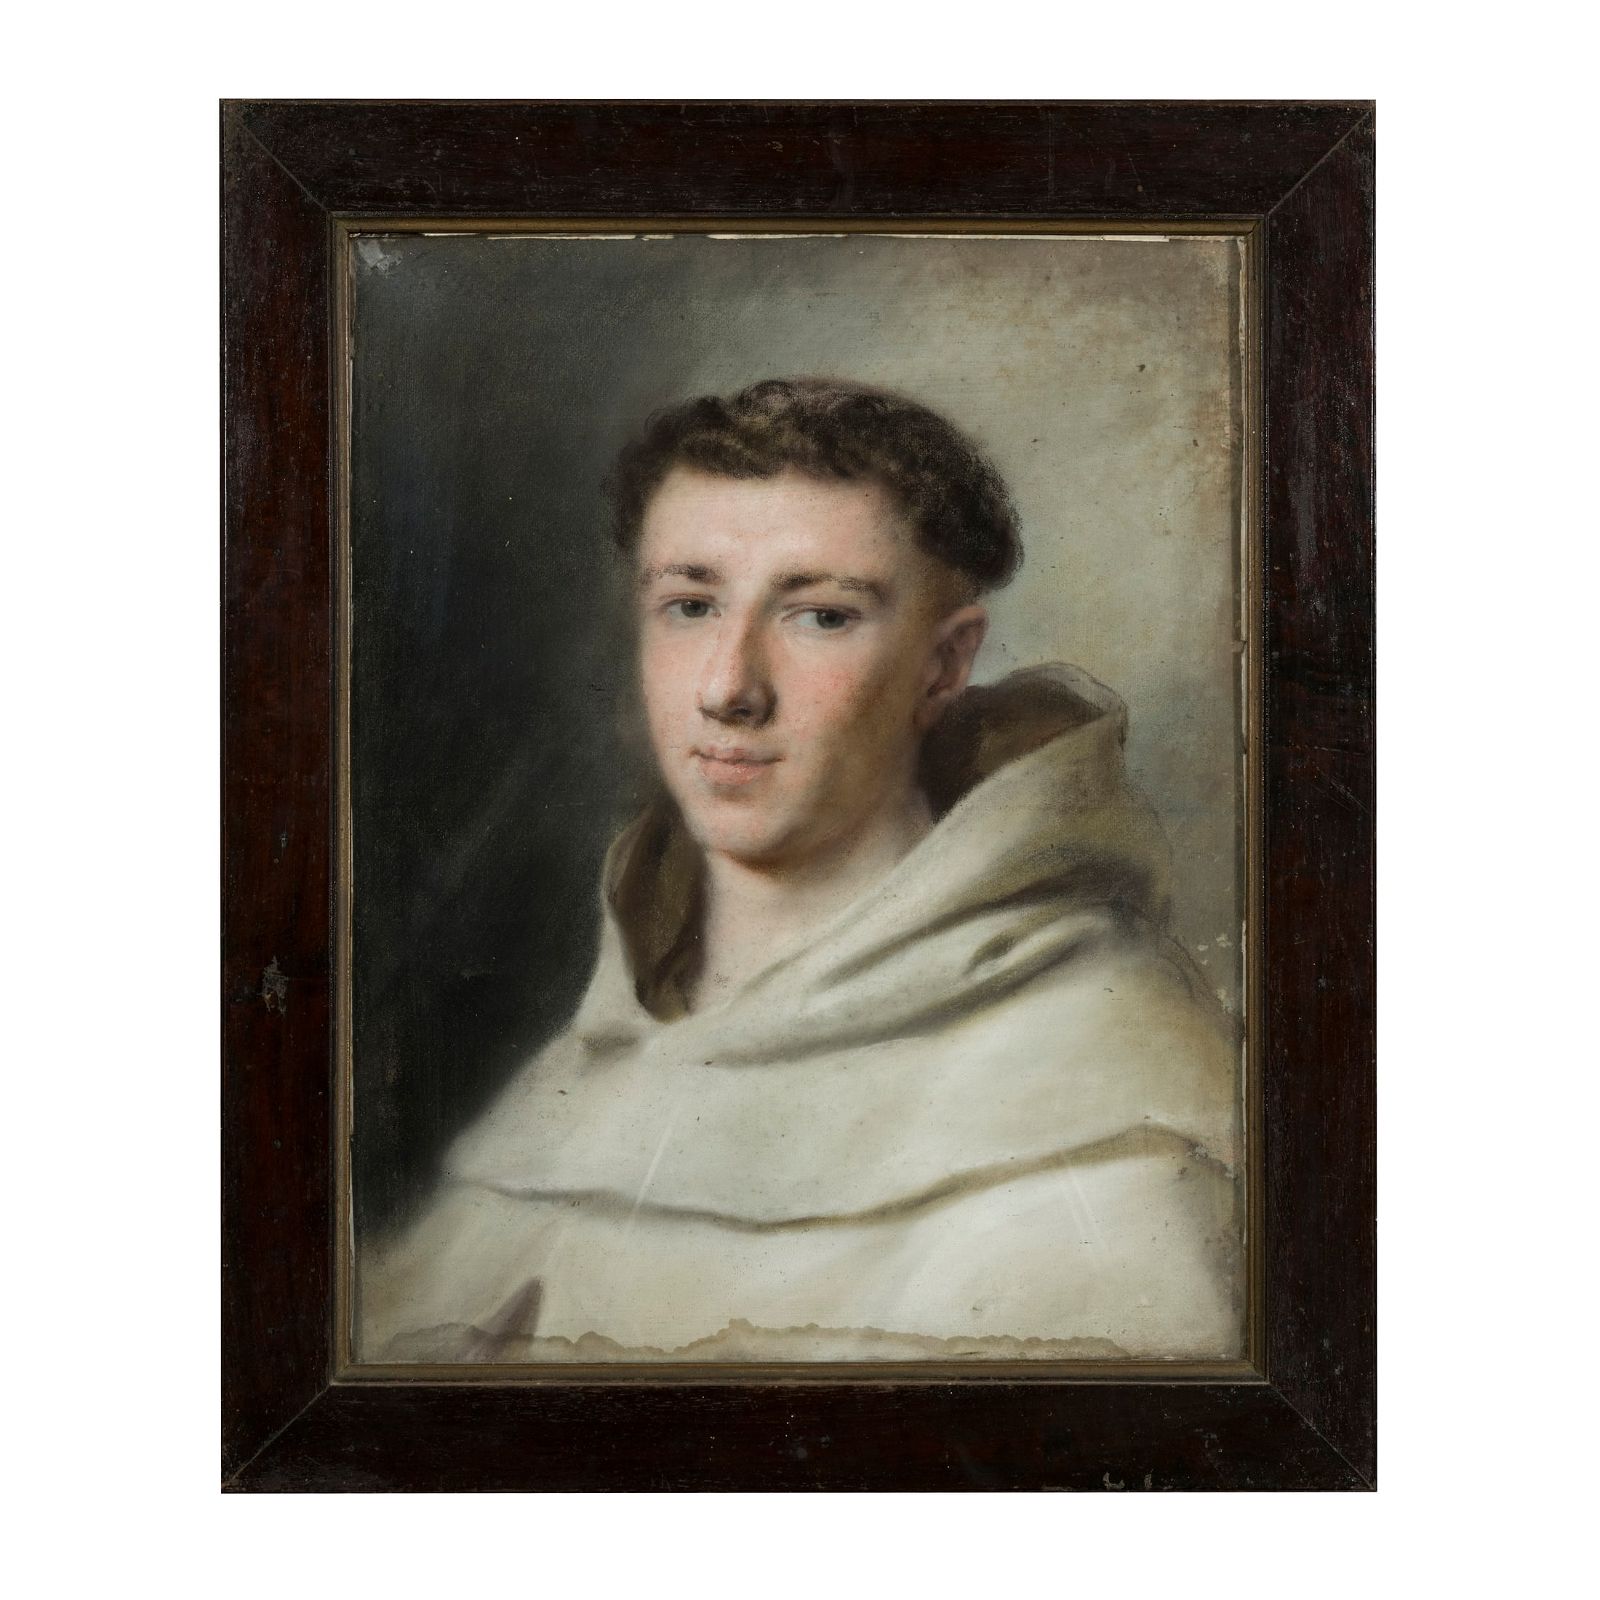 ‘Portrait of a Young Friar’, a pastel on paper by Rosalba Carriera that hammered for €60,000 and sold for €79,200 ($85,940) with buyer’s premium at Lucas Milano SRL.